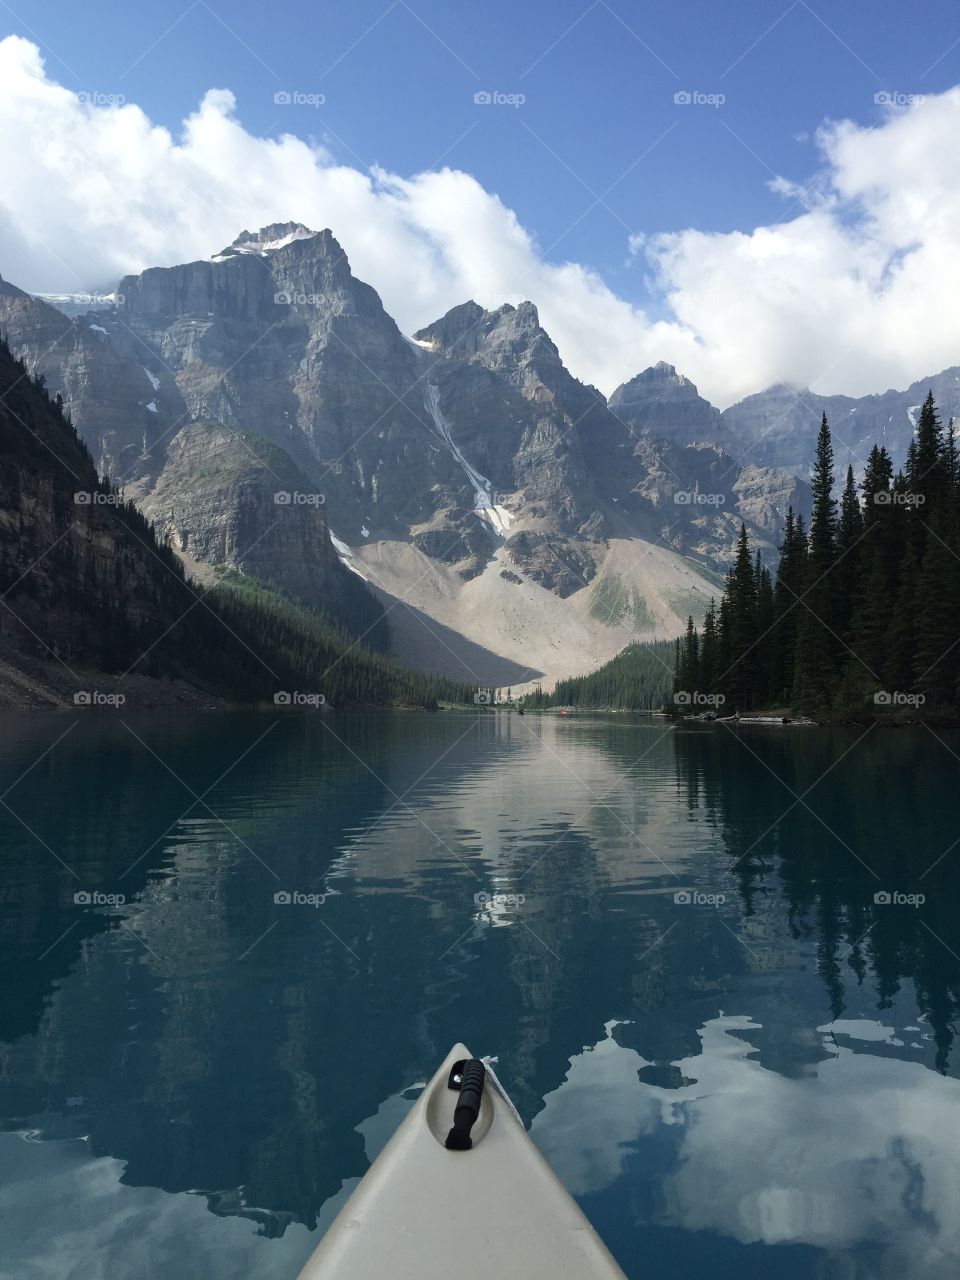 Canoeing in the mountains 